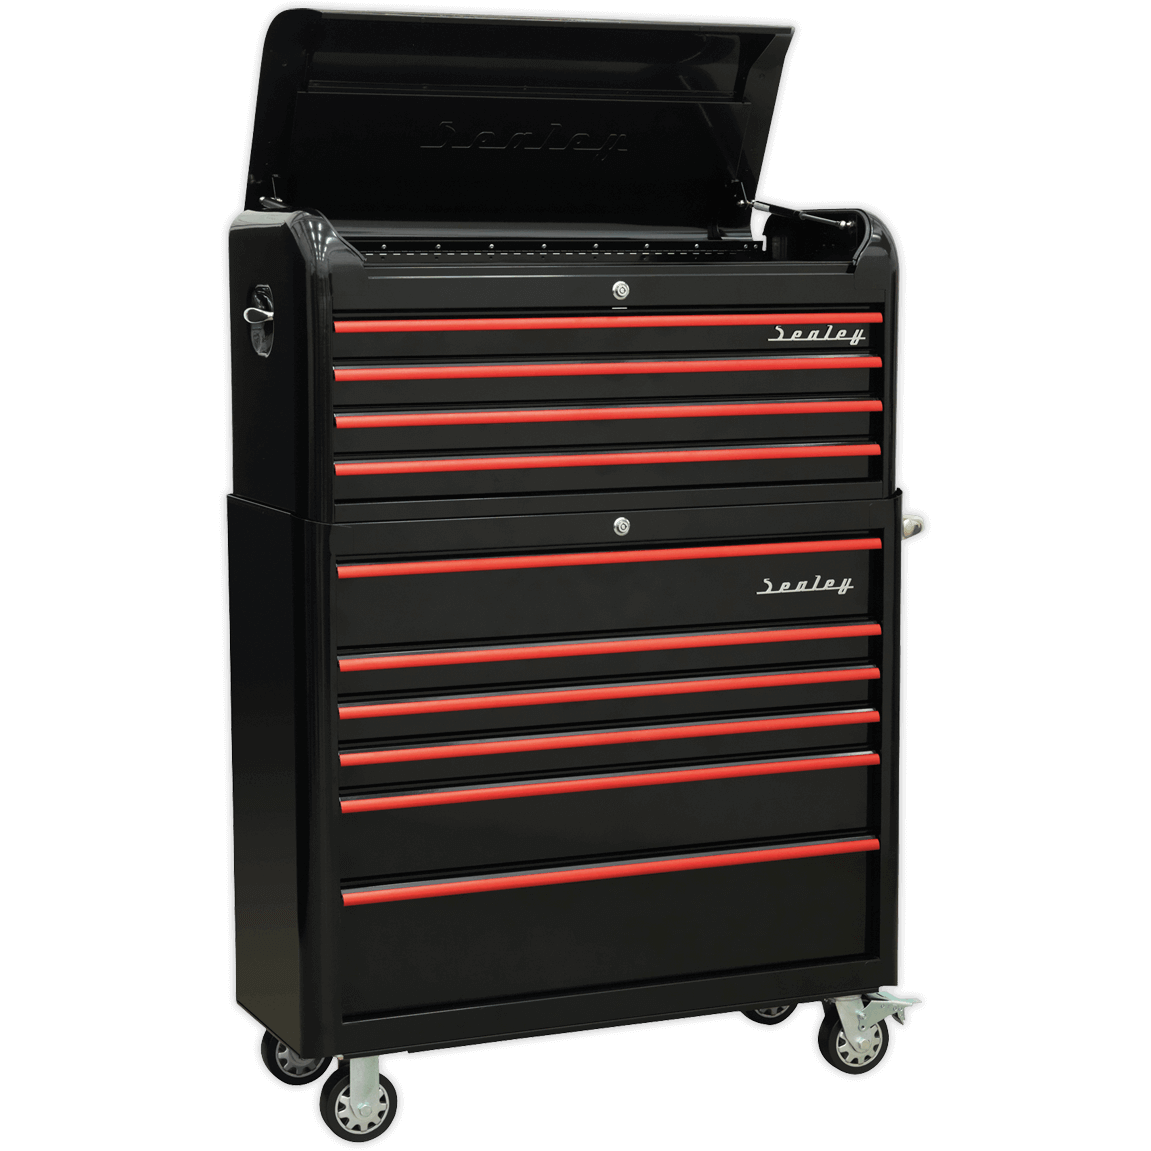 Sealey Premier Retro Style Wide 10 Drawer Roller Cabinet and Tool Chest Black / Red